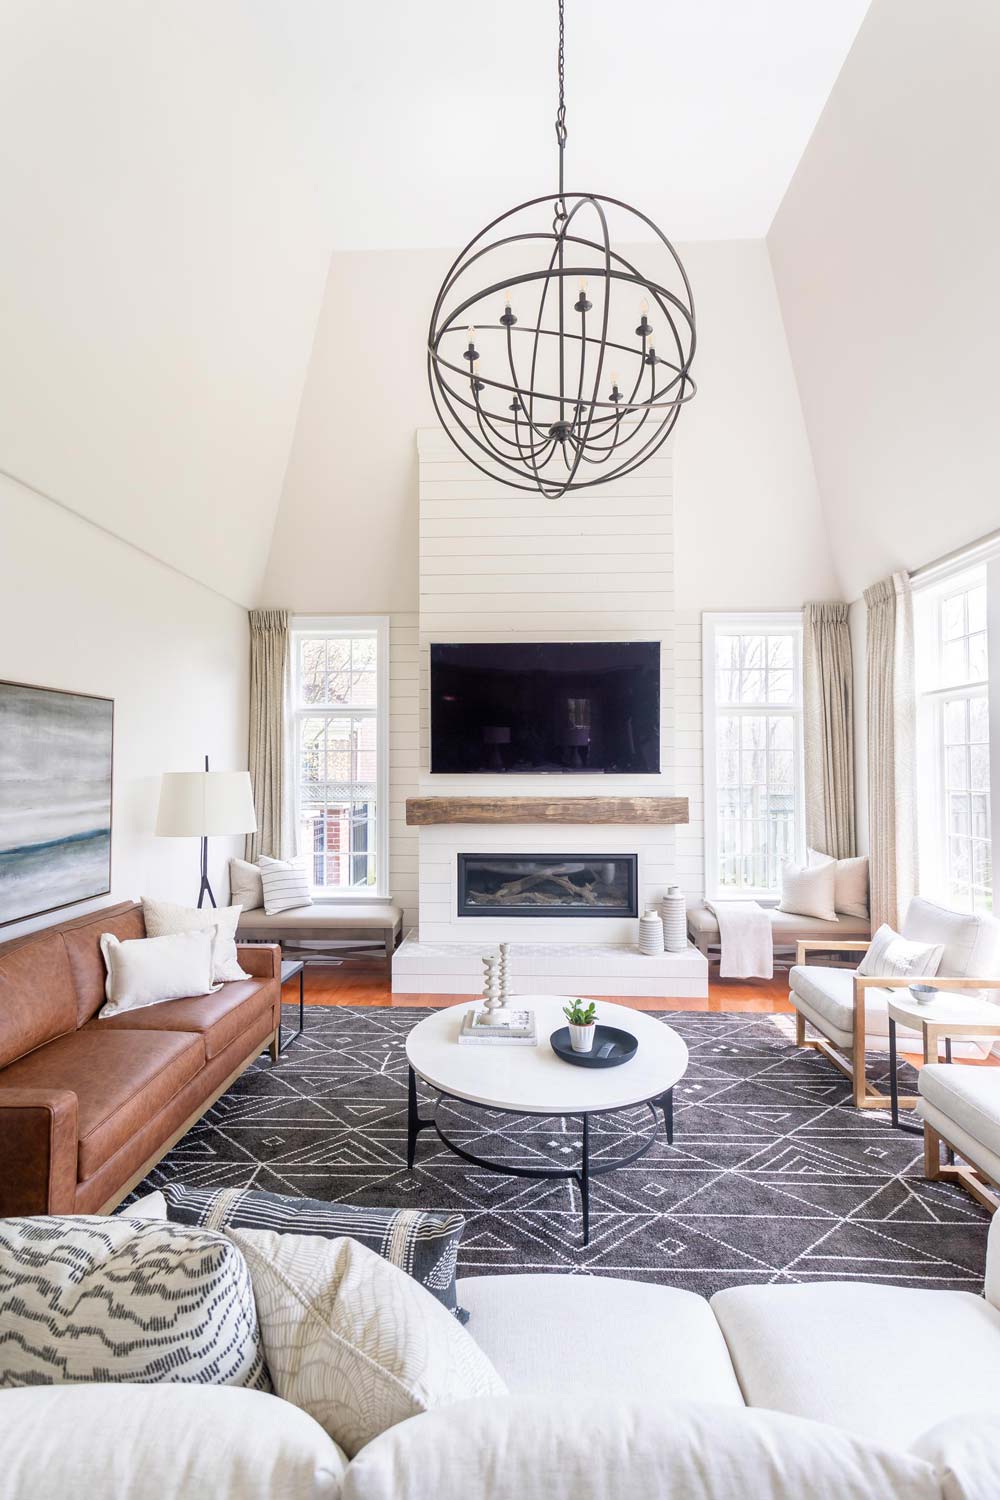 Bright Transitional Family Room with Shiplap Fireplace, Vaulted Ceilings and Large Ceiling Light